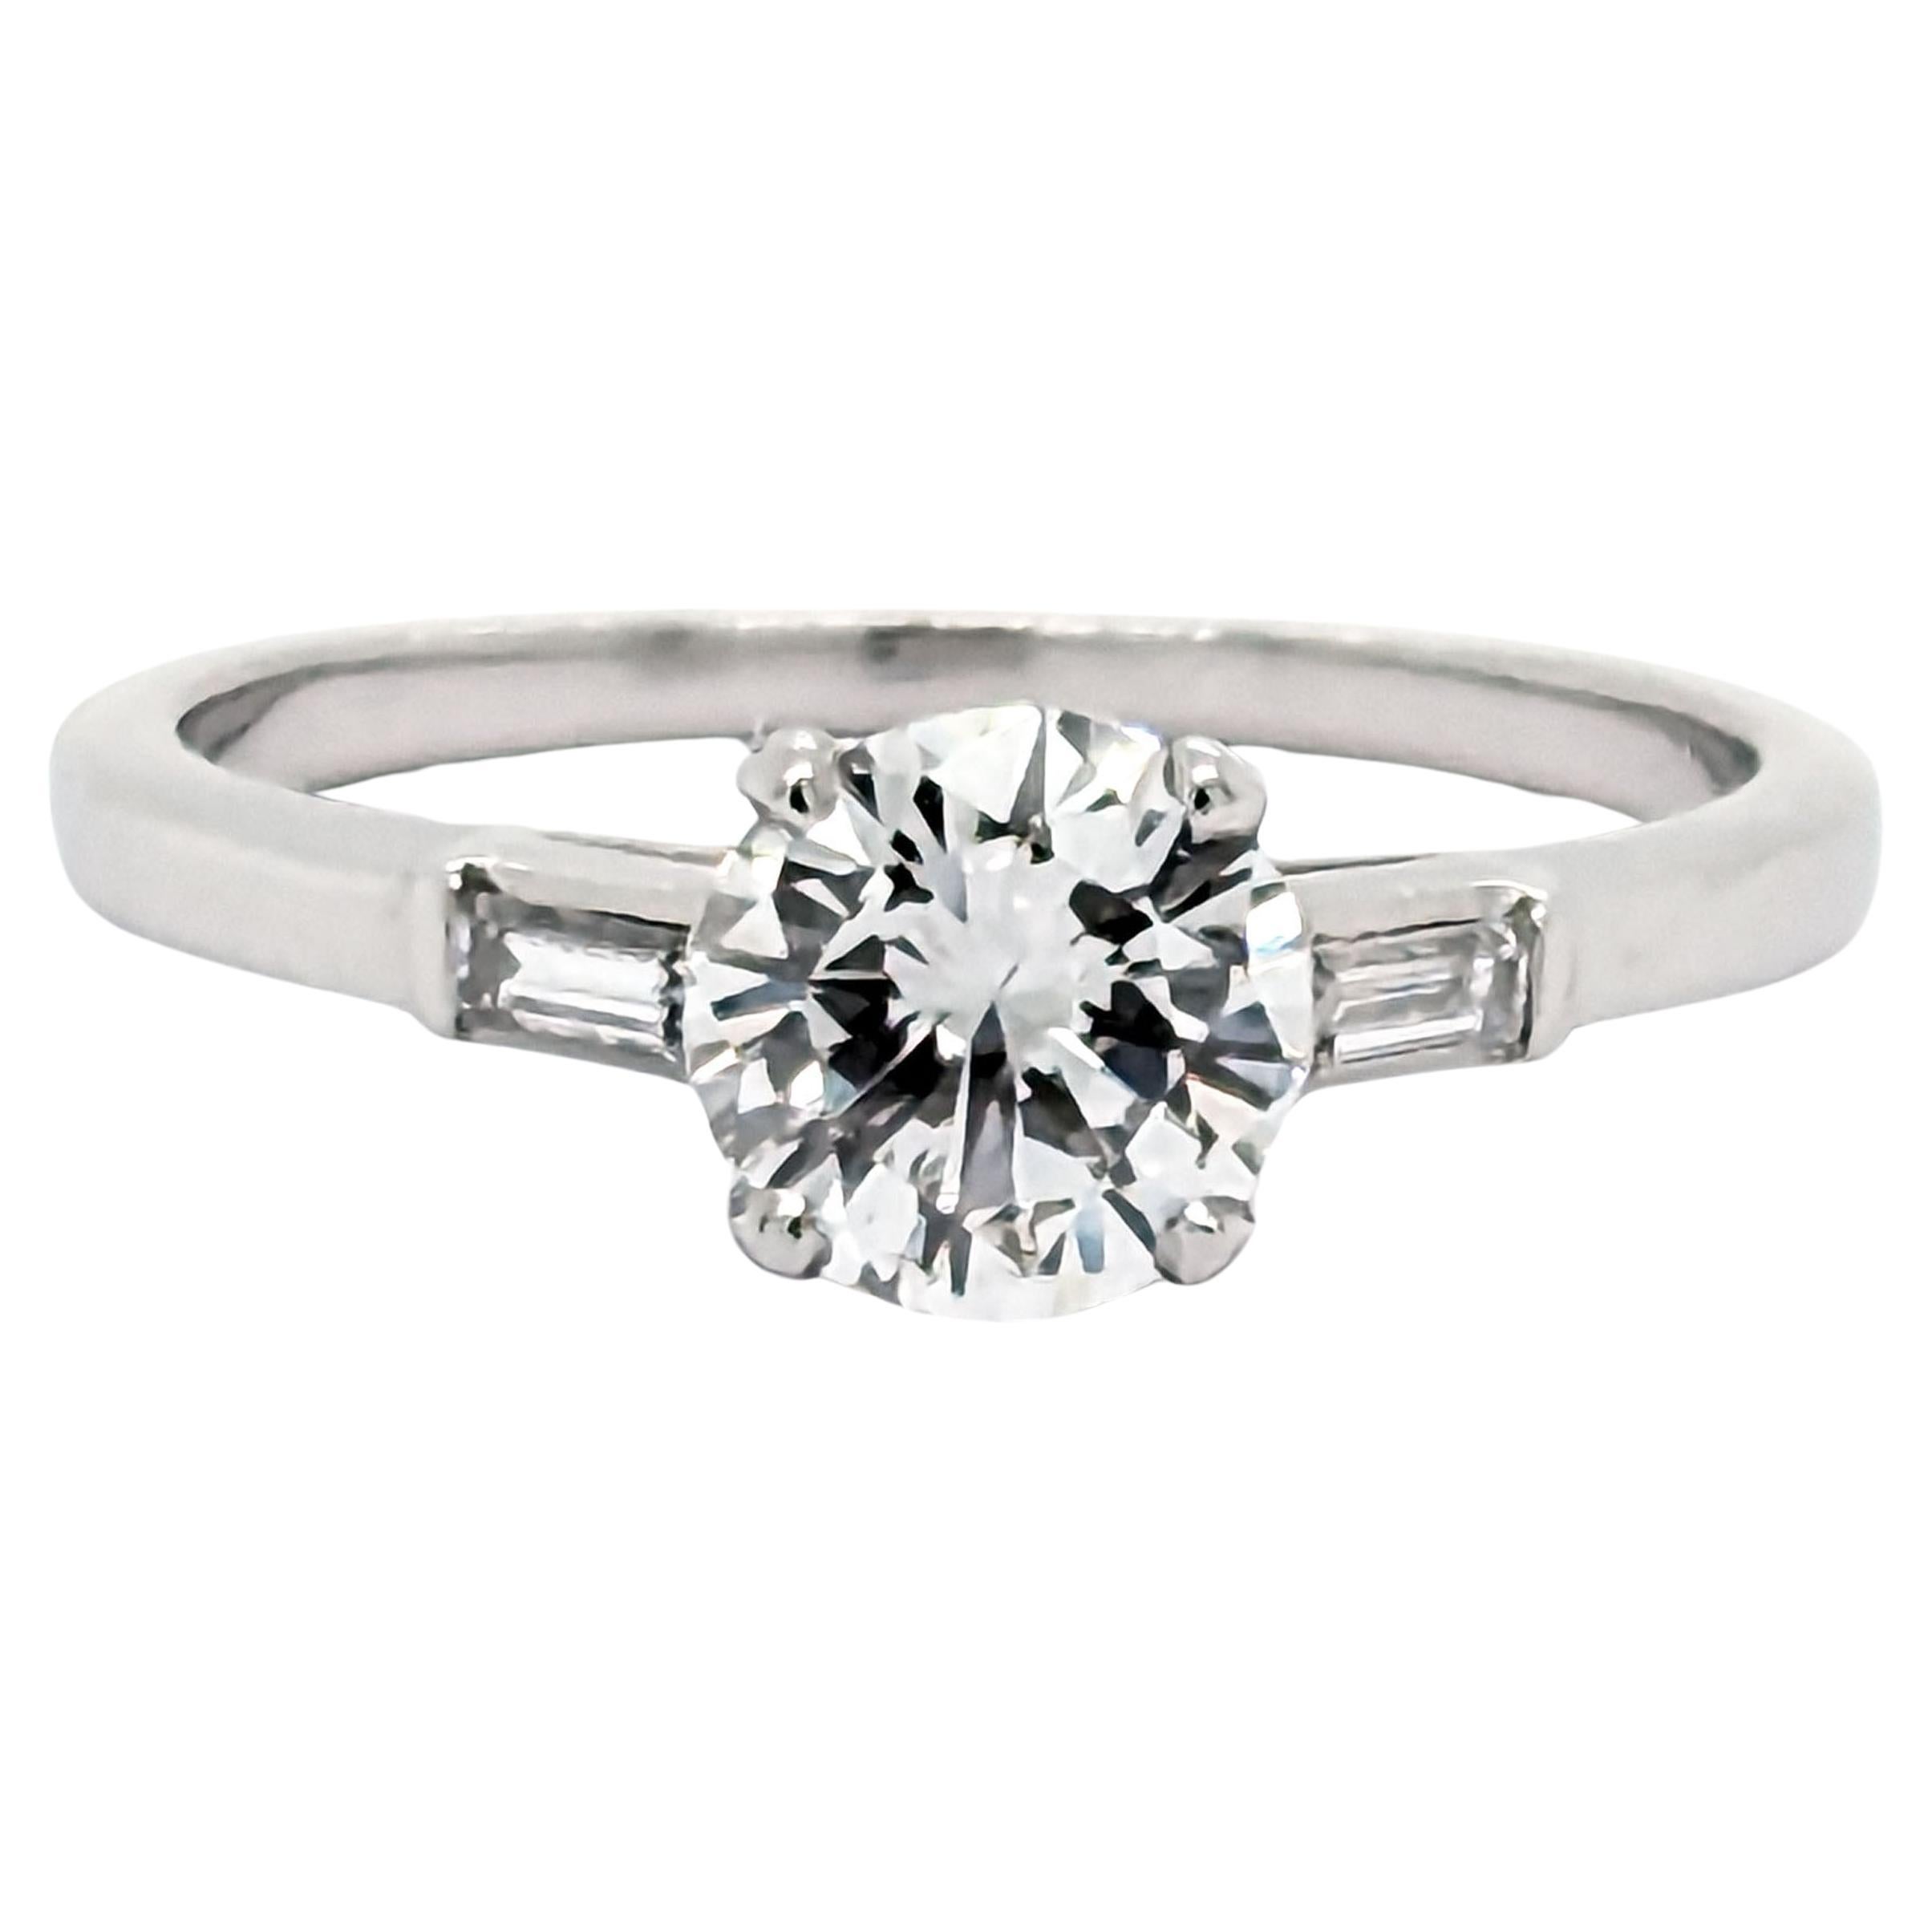 Vintage Solitaire Diamond and Platinum Ring, 0.81 Carats, Circa 1940 For Sale